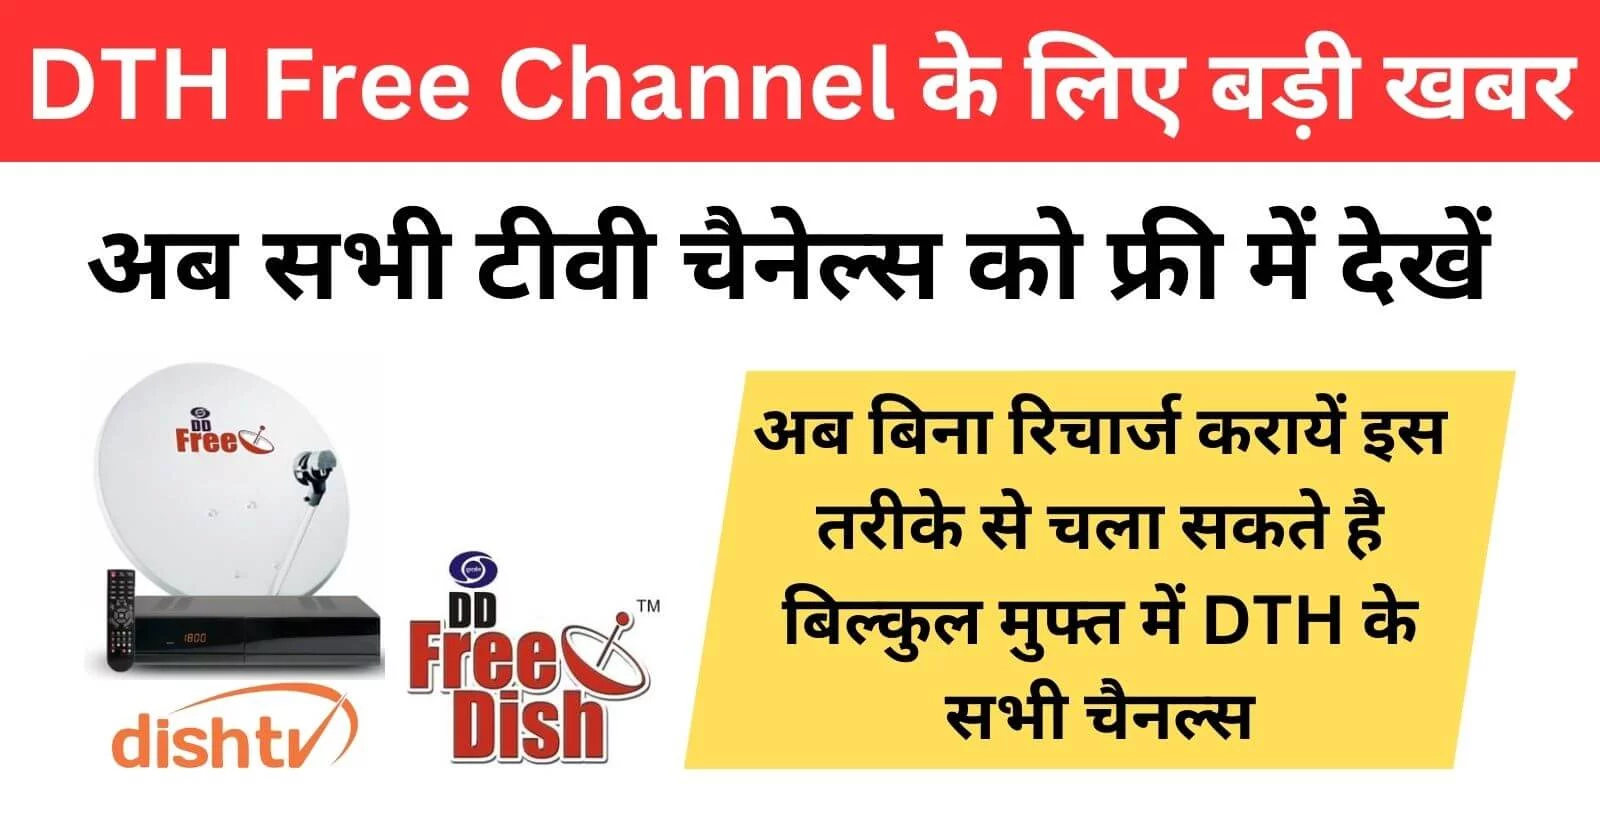 DTH Free Channel Good News